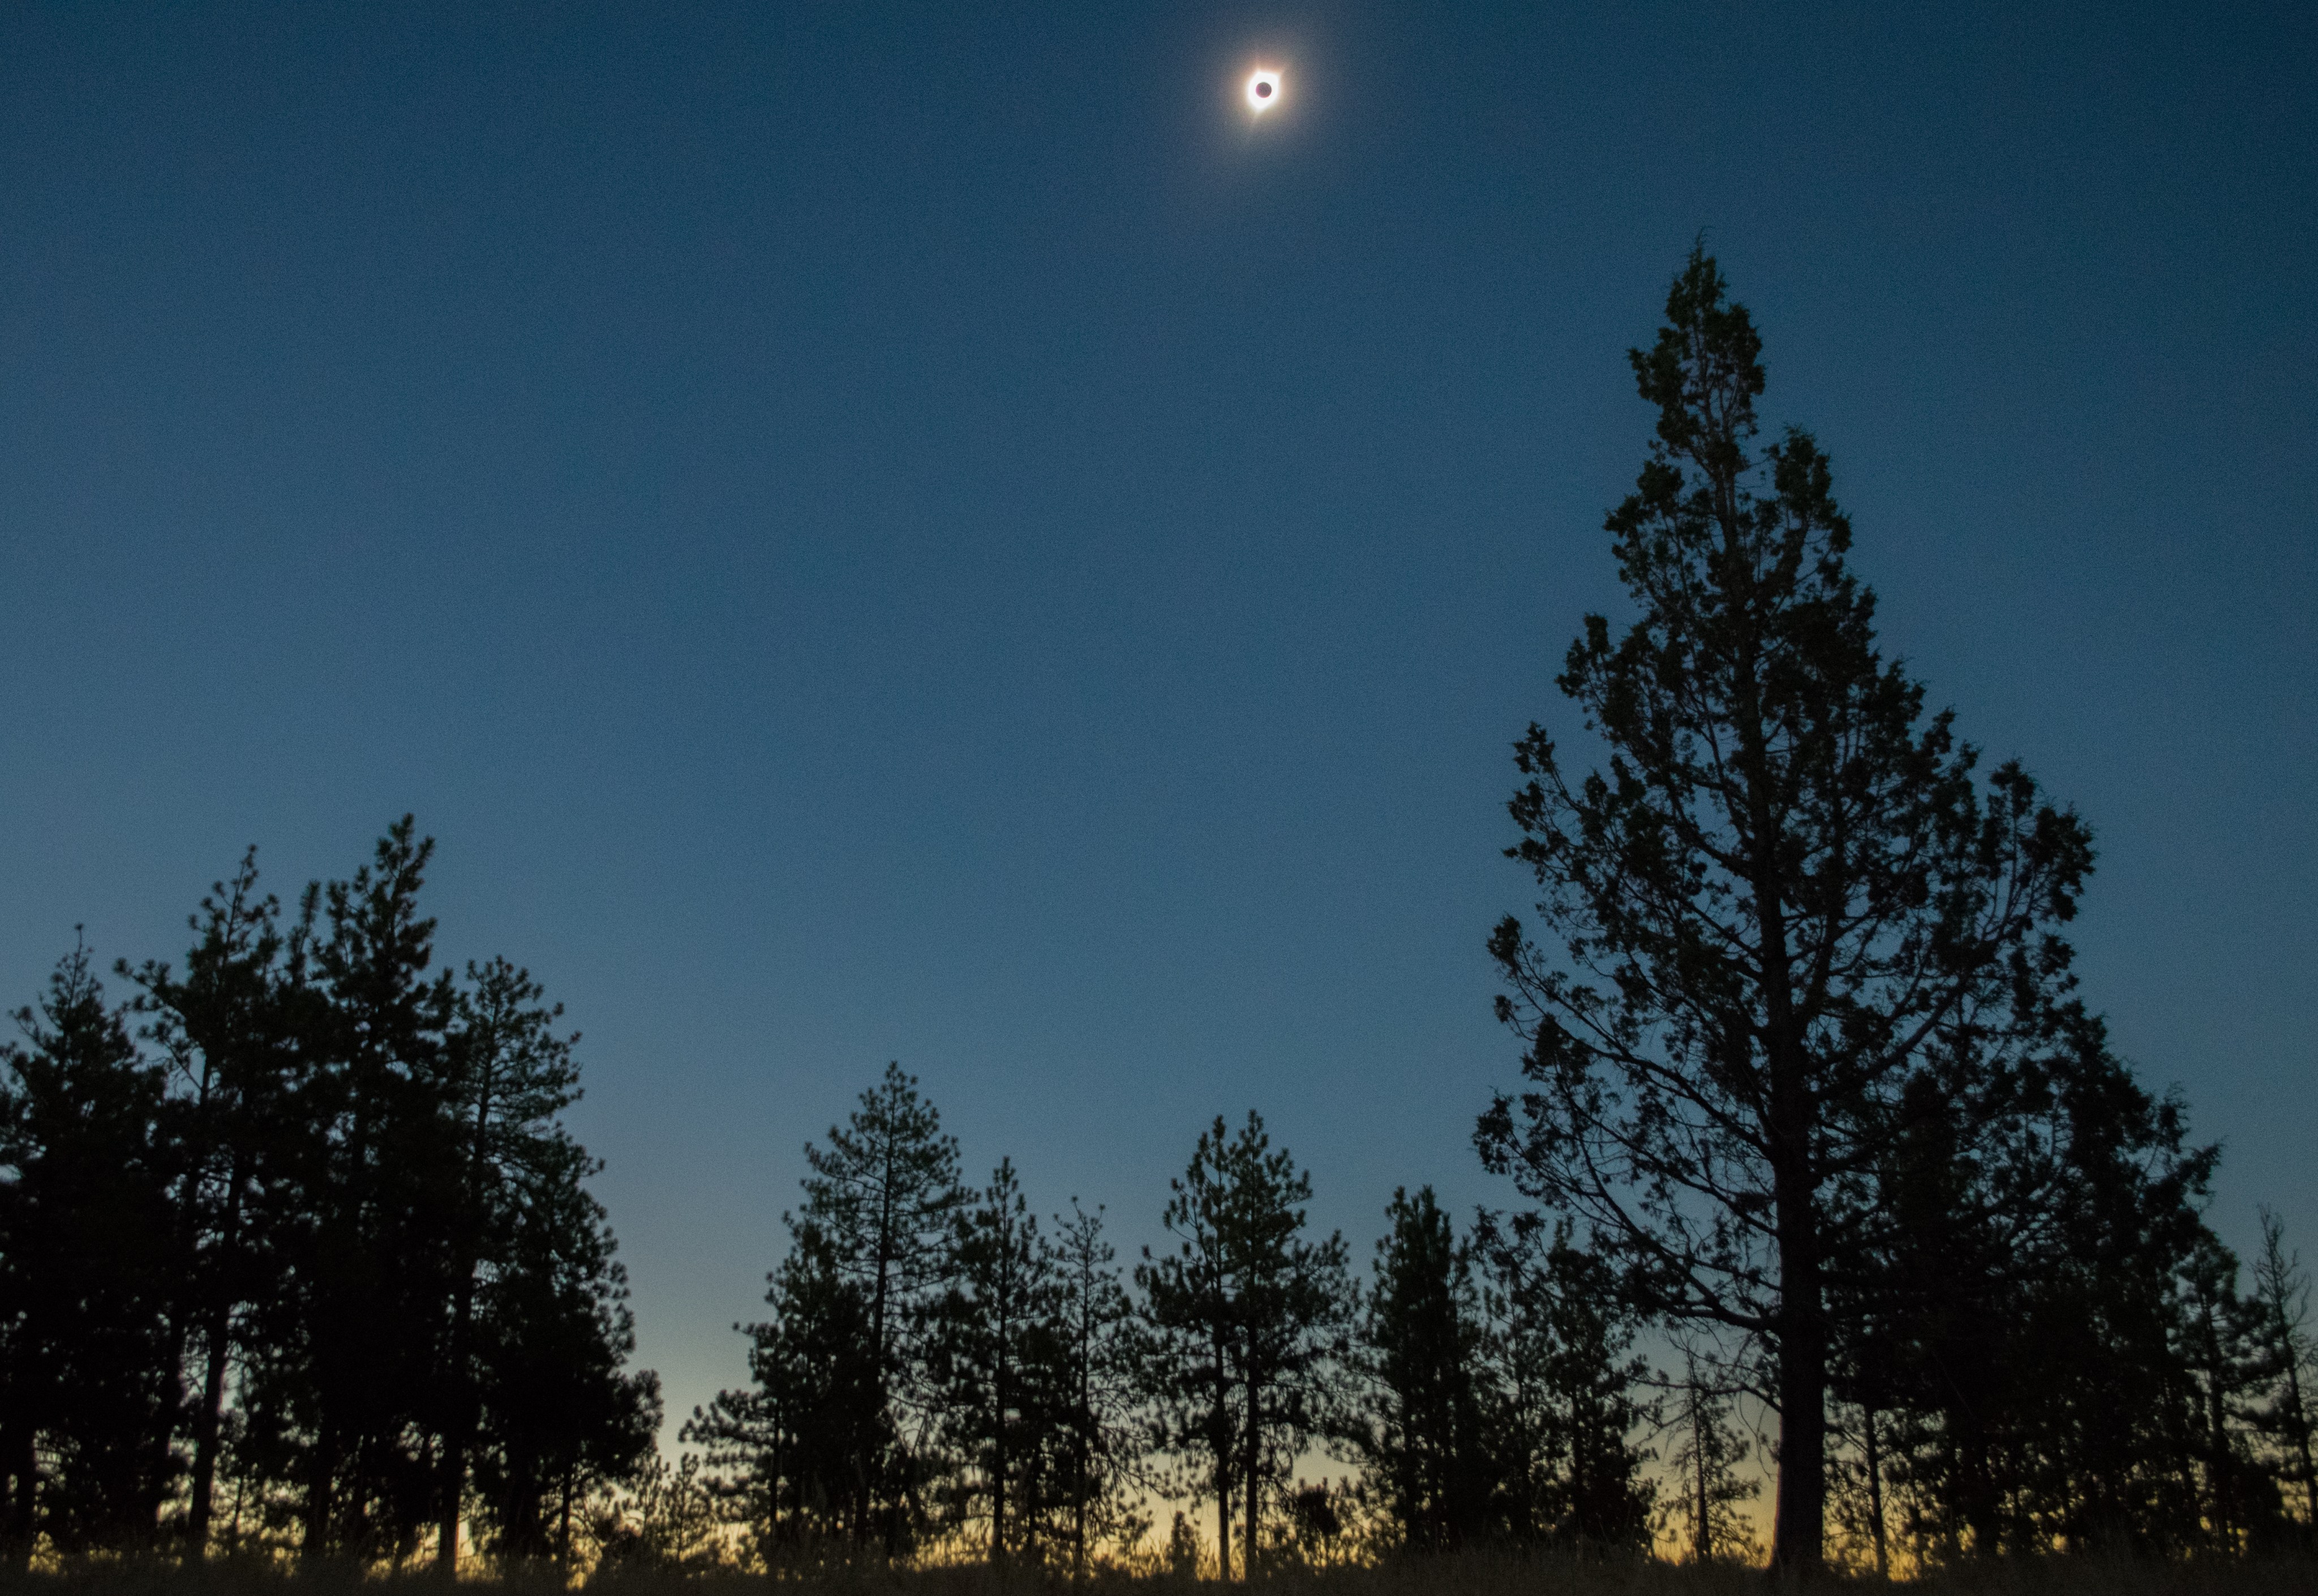 Solar eclipse over silhouetted trees